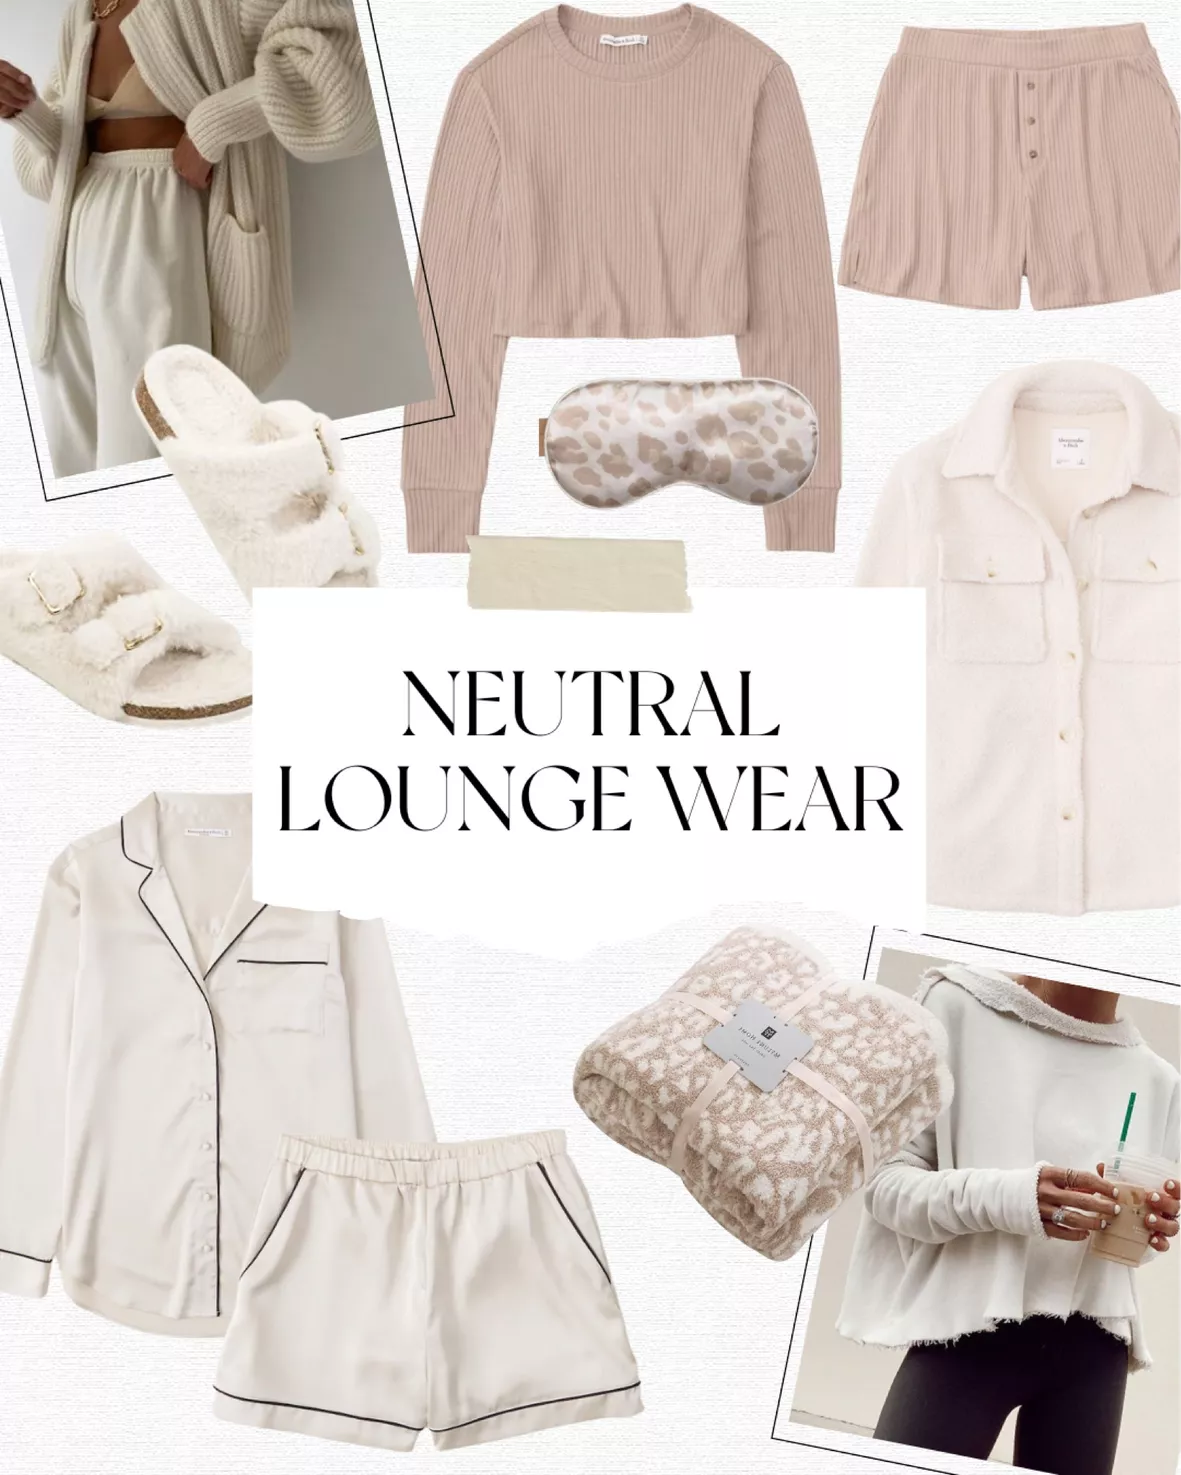 A Casually Chic take on Winter Neutrals